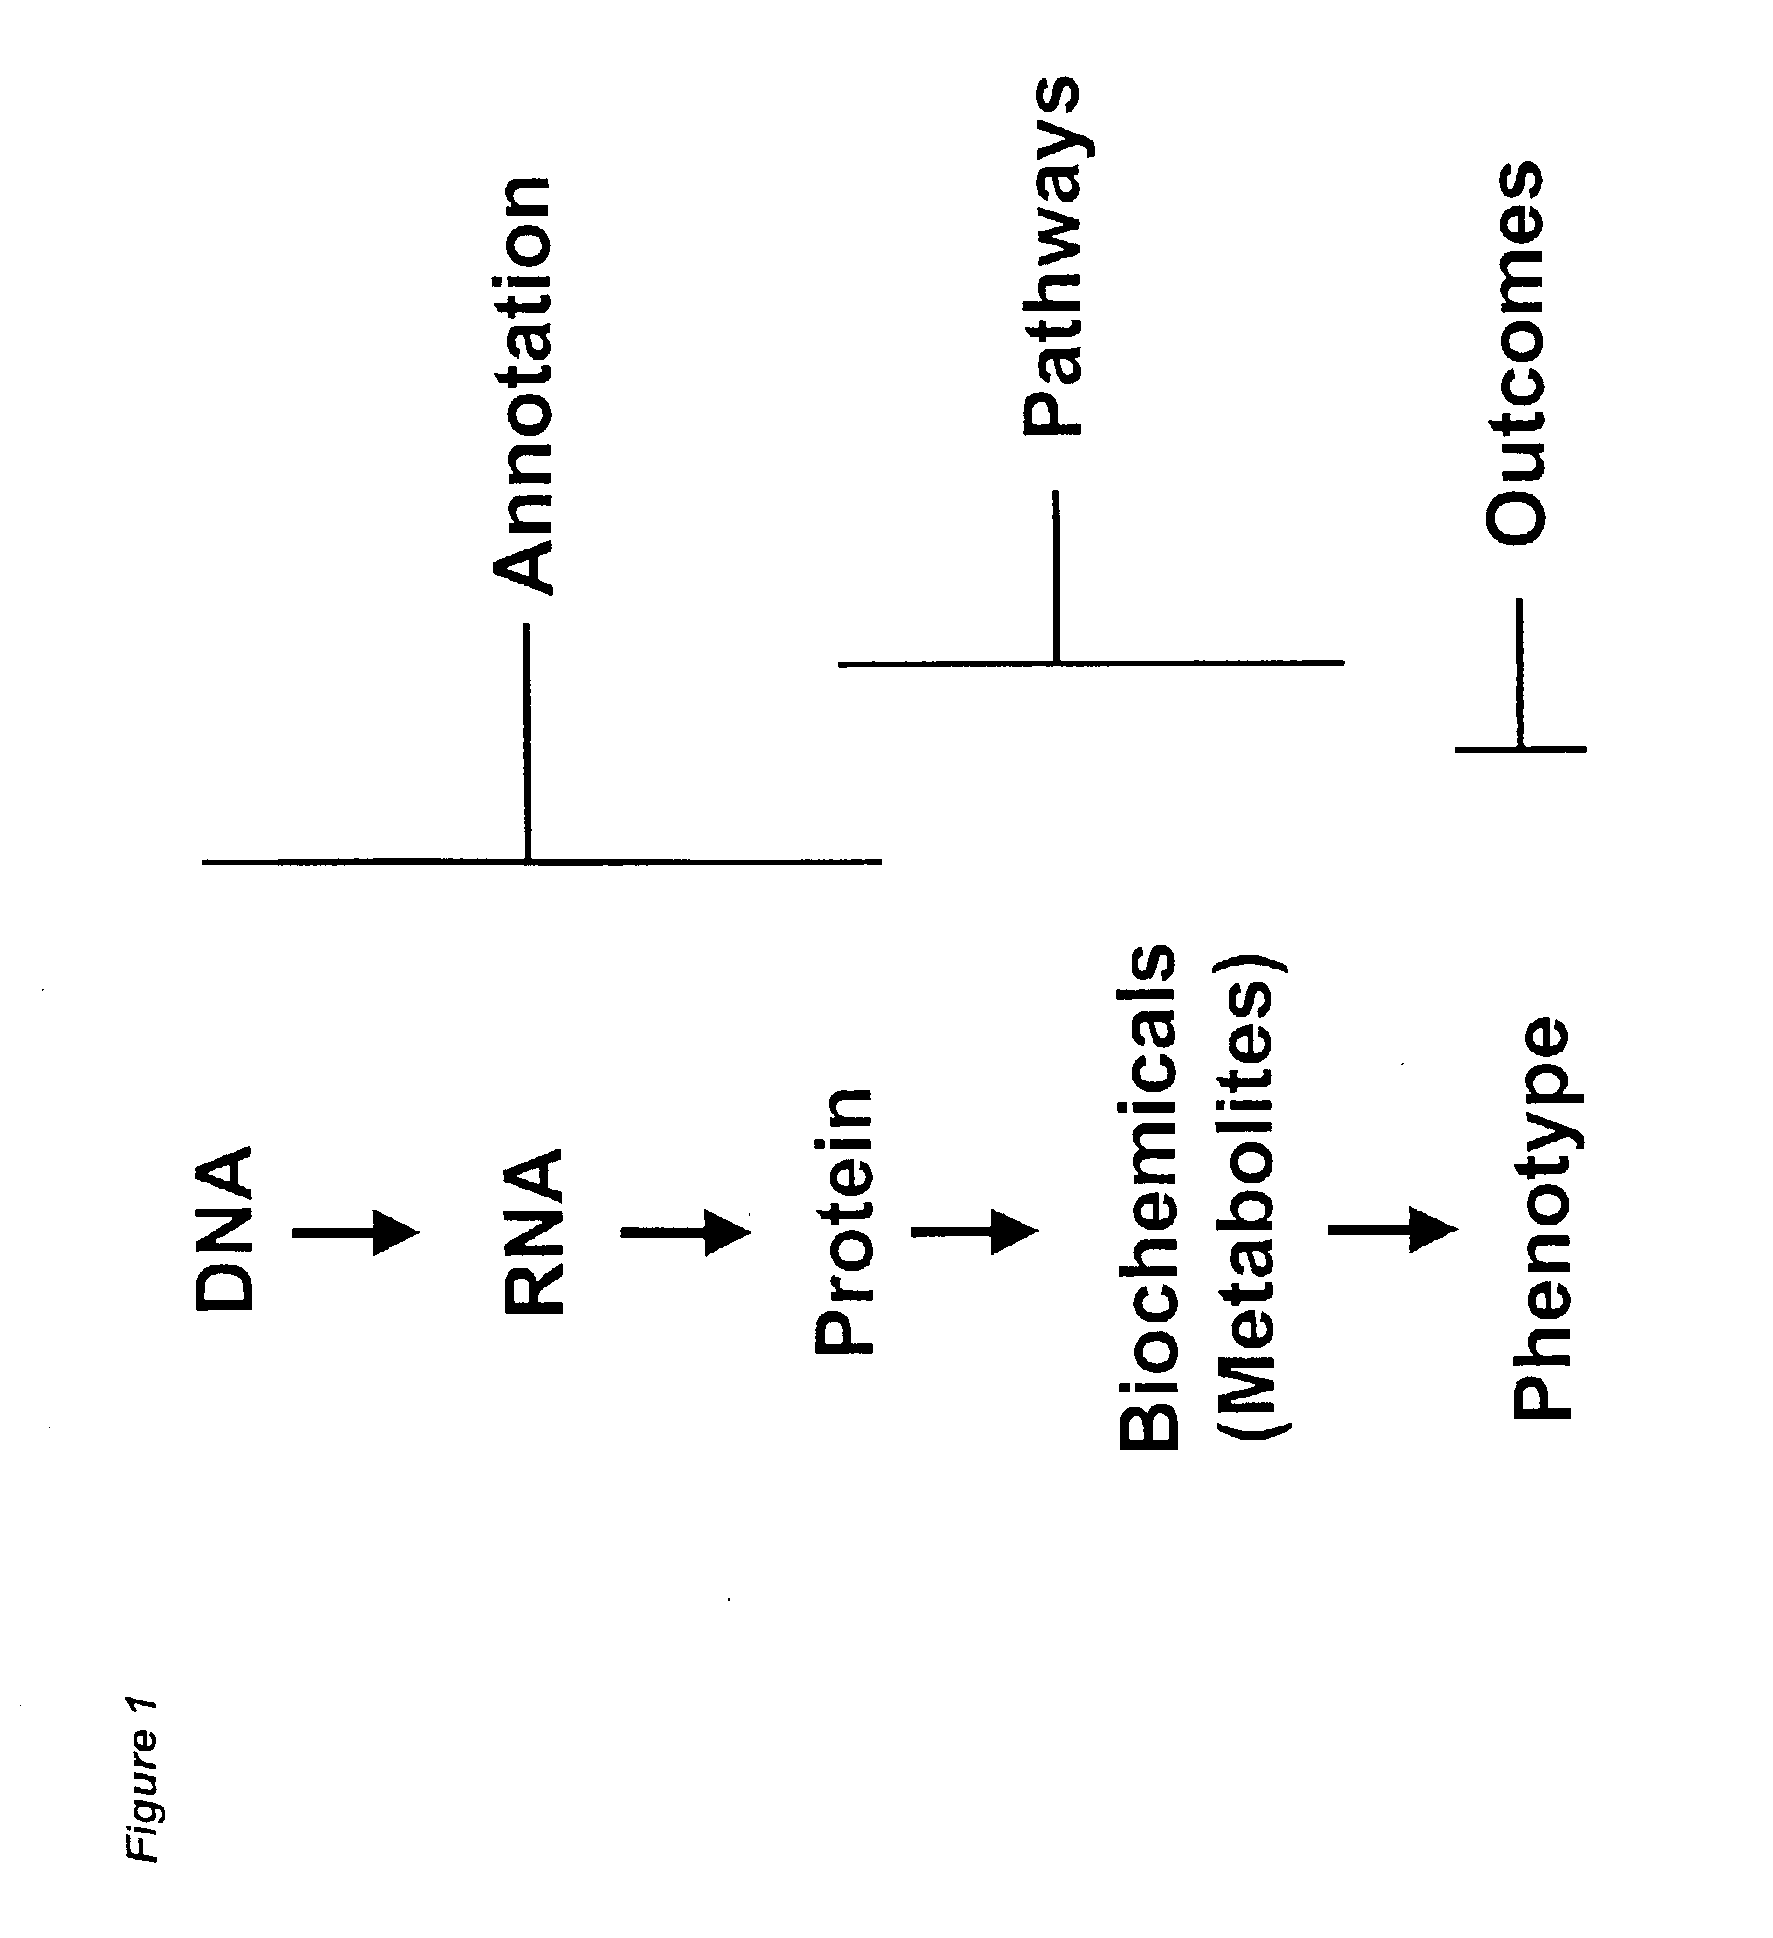 Methods and systems for analyzing complex biological systems